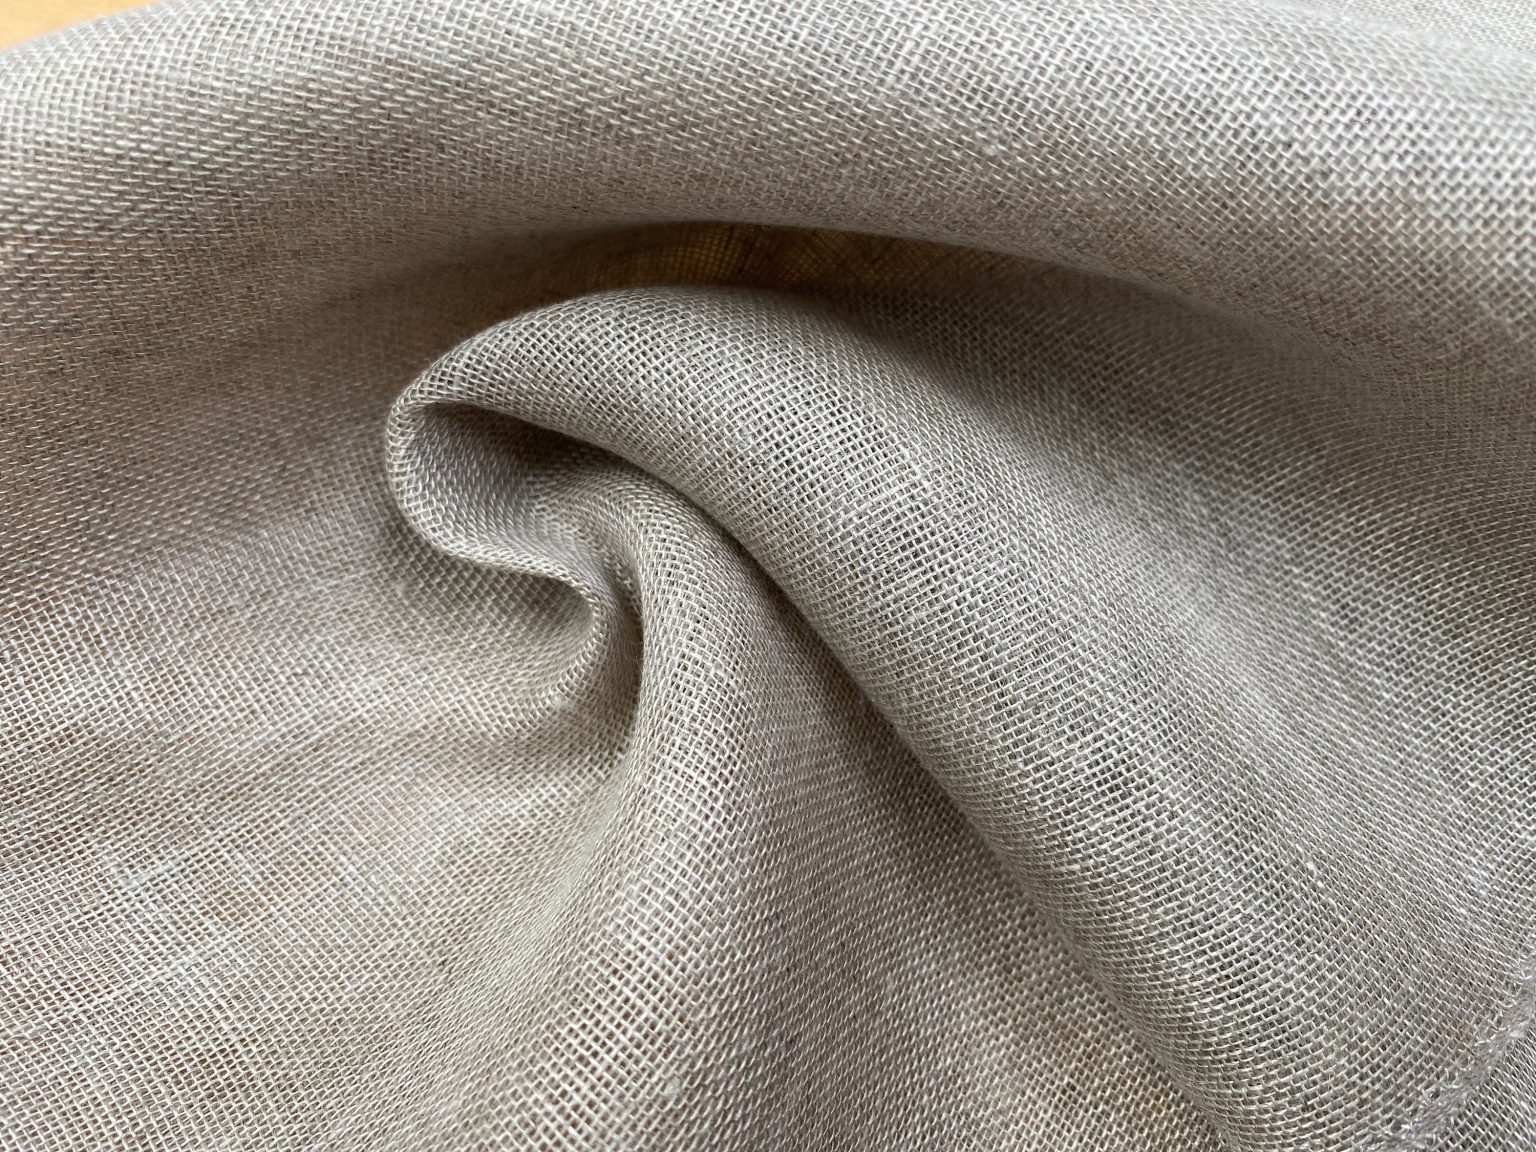 Extra Wide 100% Linen Fabric - Soft Linen Material for Home Decor, Curtains, Clothes - 118